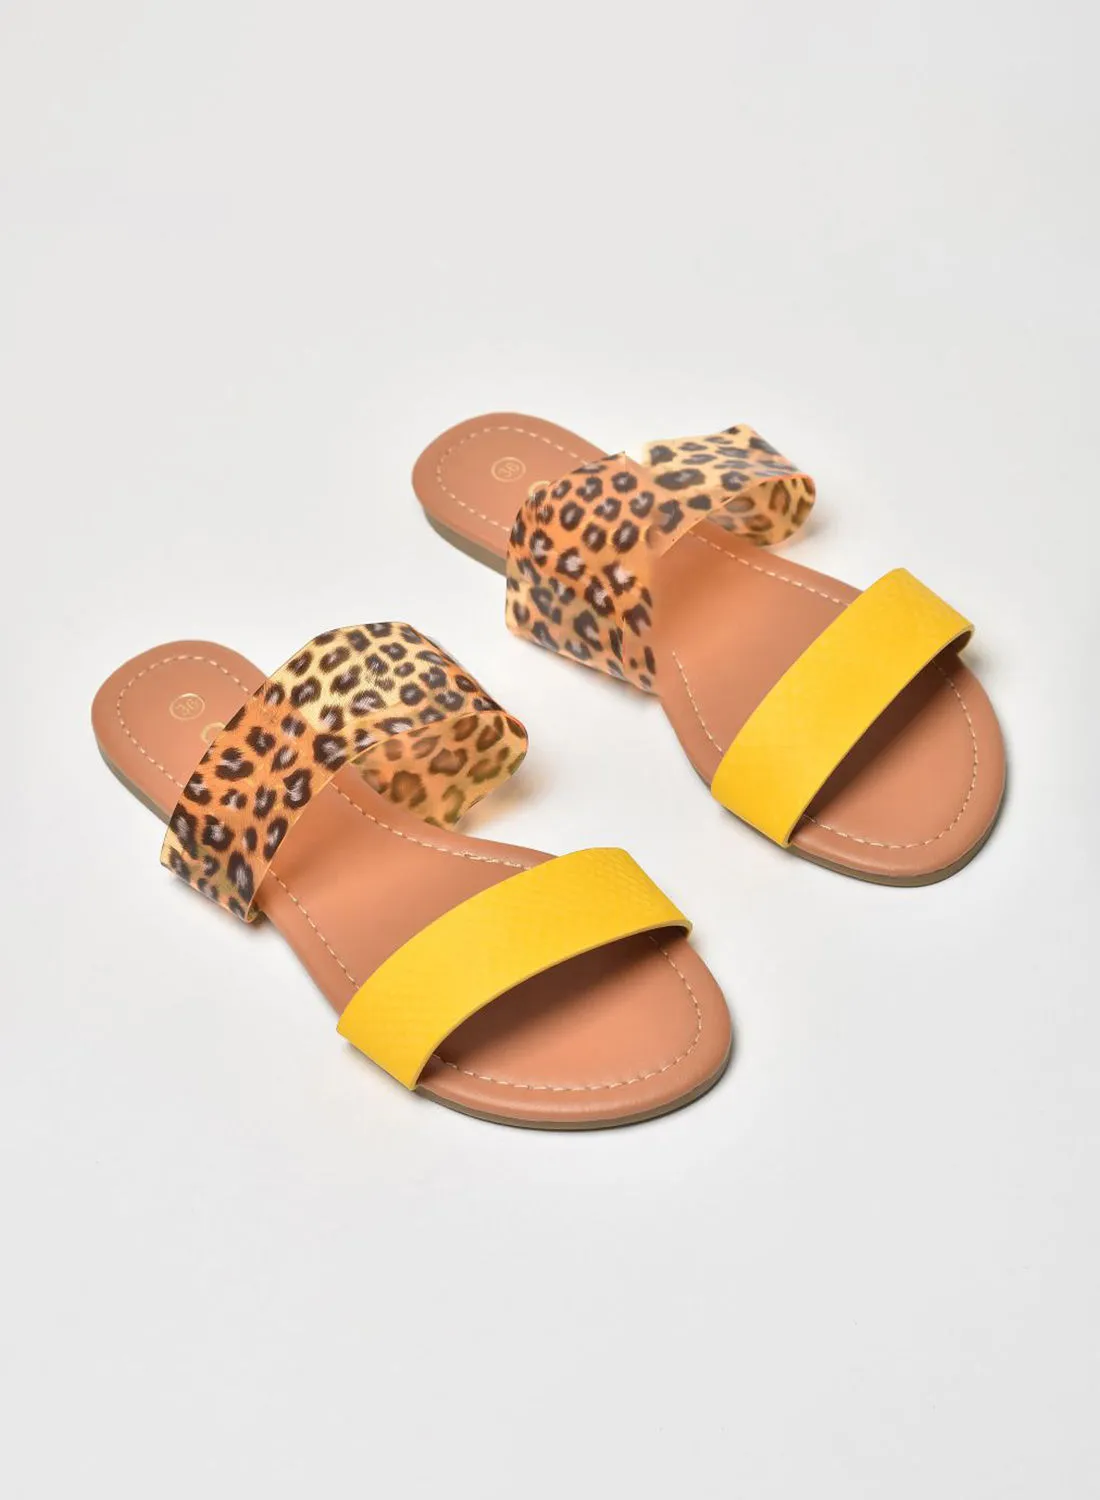 Aila Animal Printed Double Strap Flat Sandals Yellow/Brown/Black